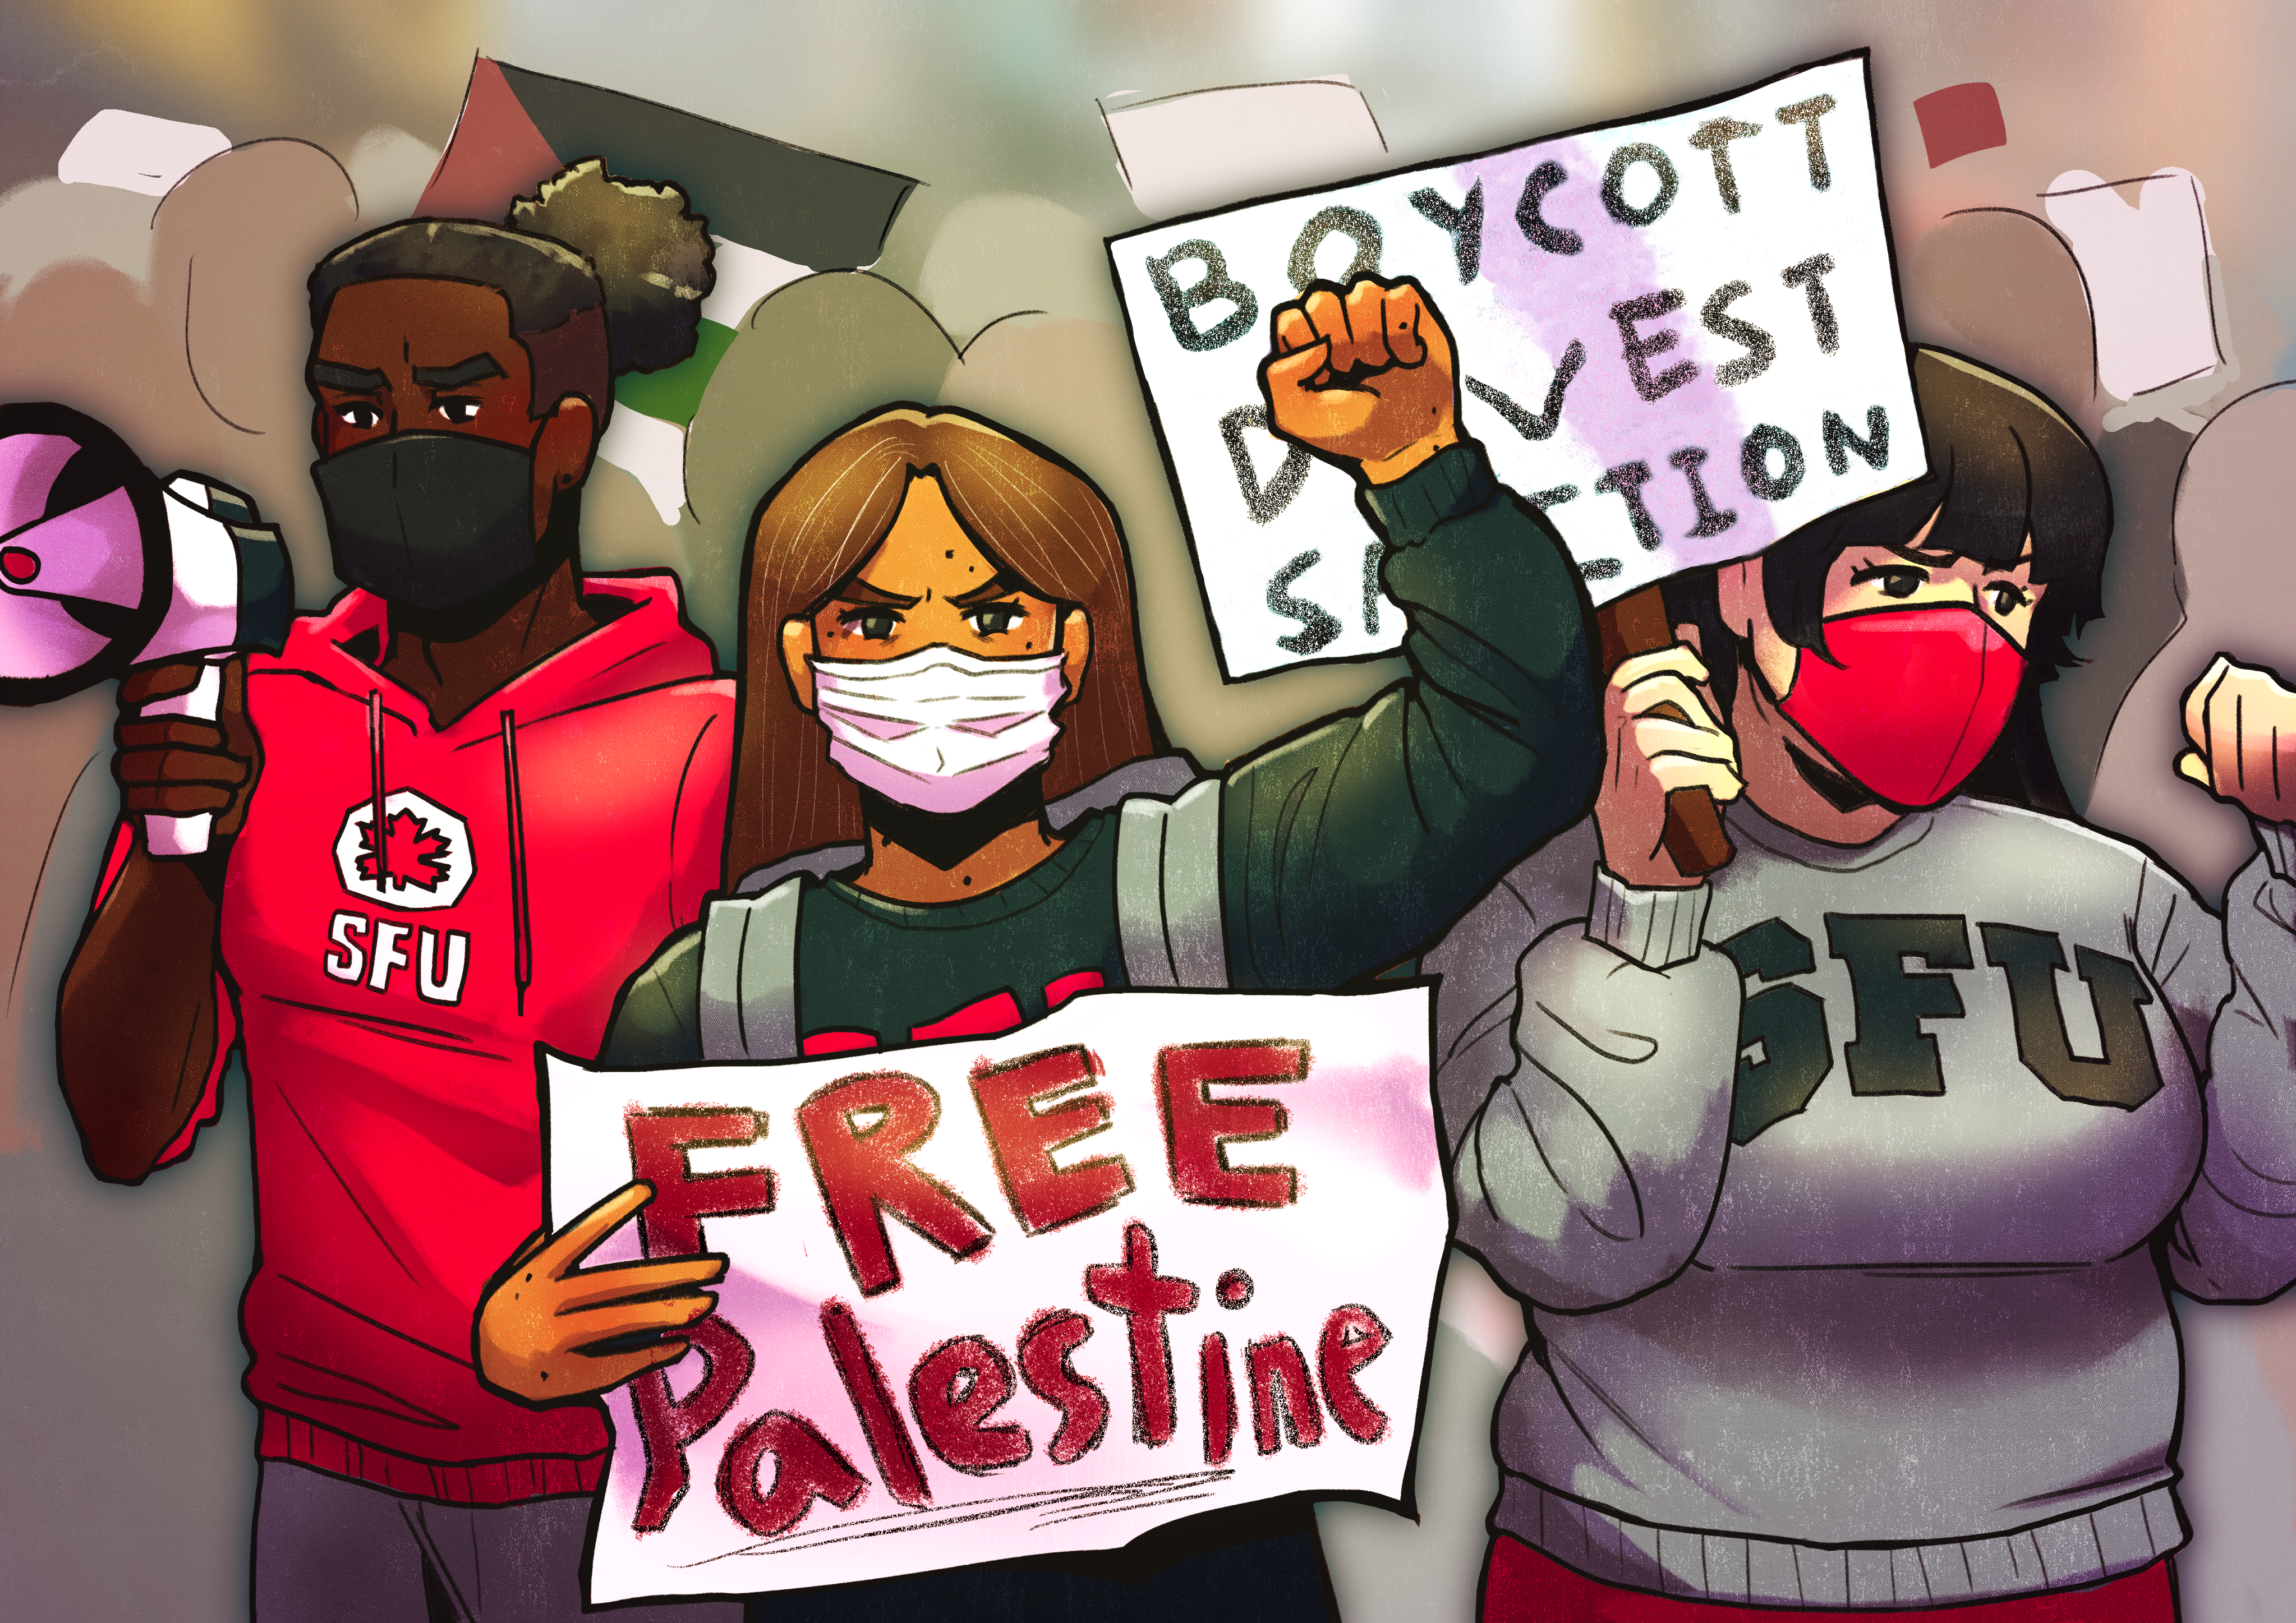 Illustration of A group of people holding signs saying “Boycott, Divest, Sanctions” and “Free Palestine”